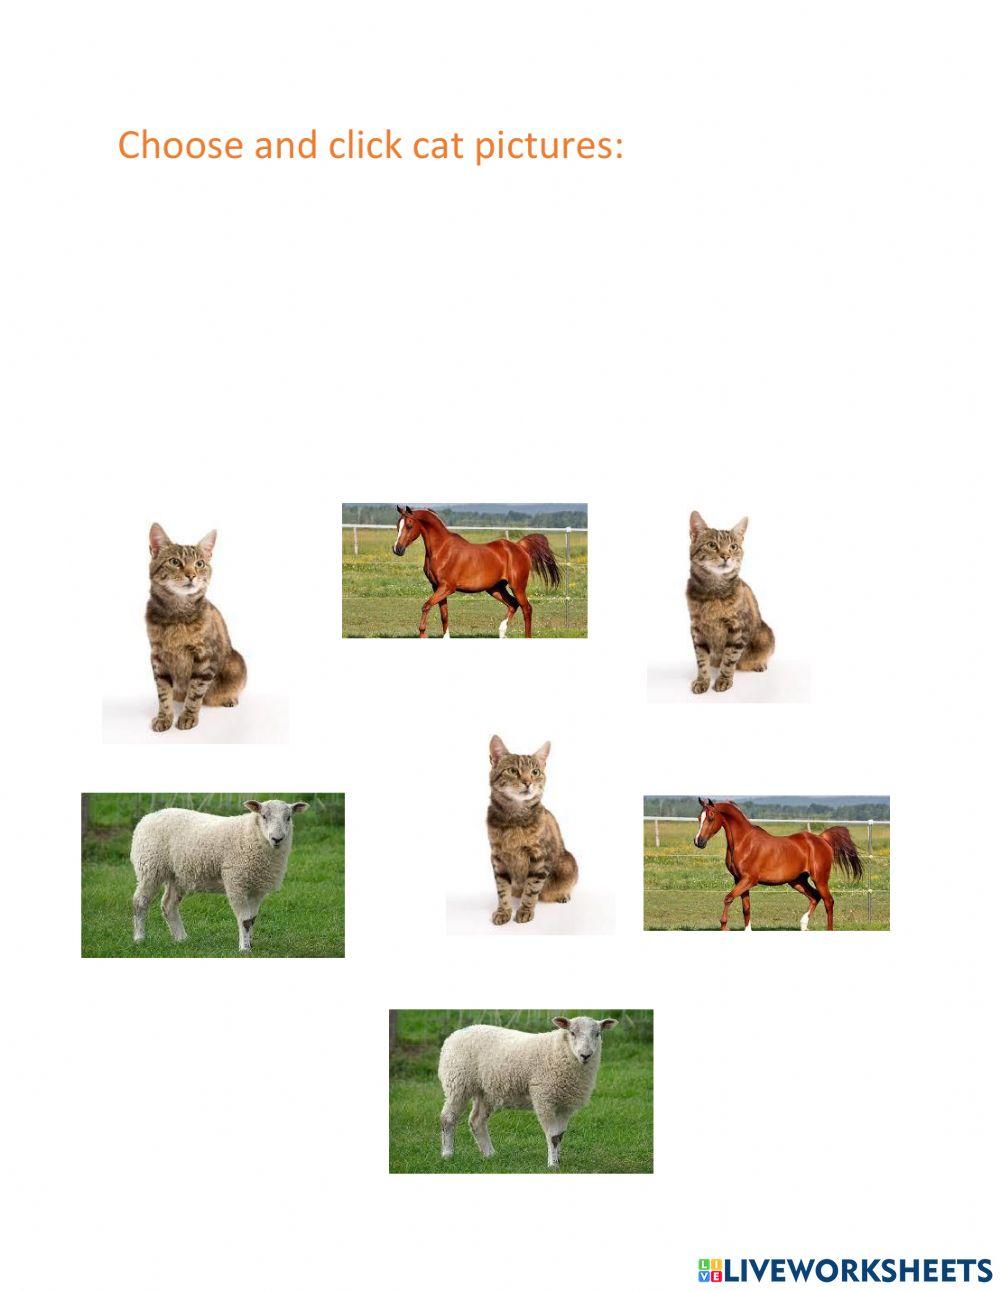 Select and click cat pictures